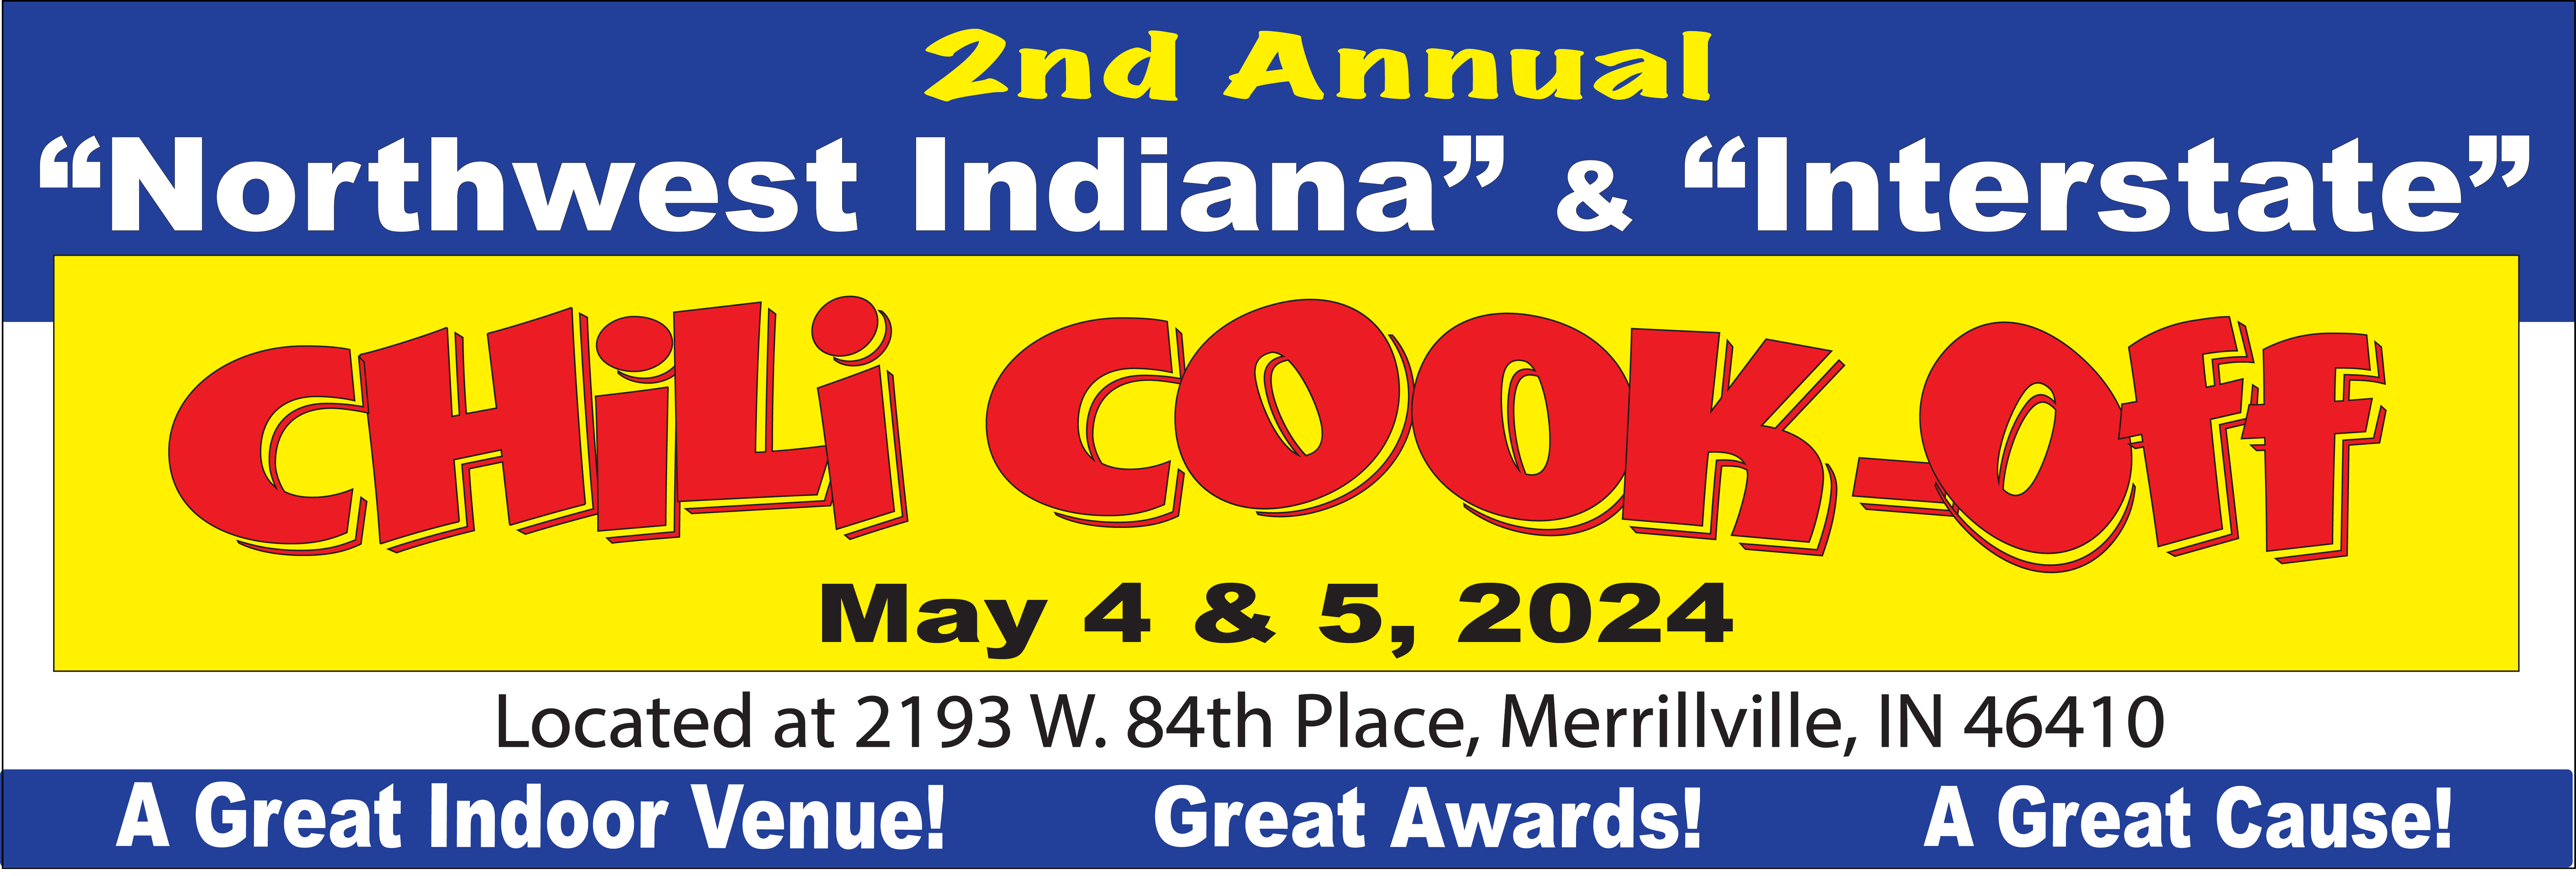 First Annual Northwest Indiana & I-65 Interstate Chili Cook Off